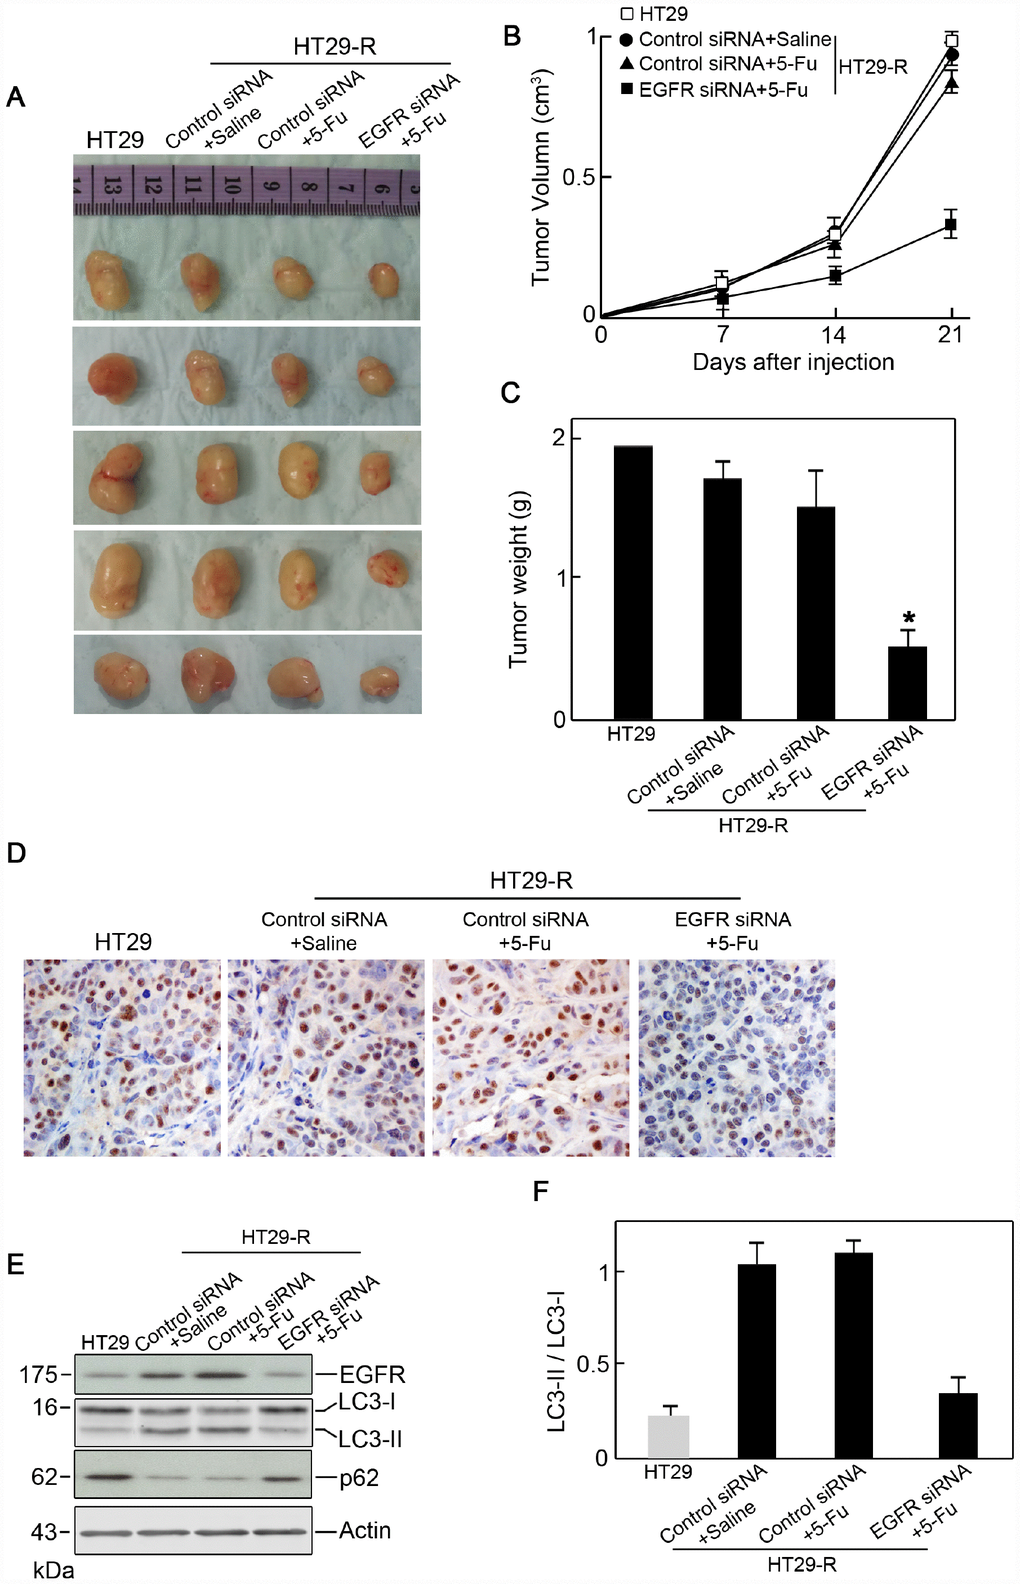 EGFR contributes to 5-FU resistance in colon cancer cells through autophagy. (A) Xenograft tumors formed in nude mice. A total of 5 × 106 cells was subcutaneously injected into nude mice (n=5 for each group). The mice were sacrificed on day 21 after the injection. Tumors were harvested and representative images are shown. (B) and (C) EGFR knockdown promoted the anticancer effect of 5-FU in vivo as demonstrated by reduced tumor volume (B) and tumor weight (C) (n=5). (D) Immunohistochemical staining of Ki-67 in xenograft specimens. (E) Autophagy induction in a xenograft model was decreased by EGFR silencing upon 5-FU treatment. (n=5) (F) Conversion of LC3-I to LC3-II was inhibited by EGFR silencing upon 5-FU treatment (n=5, *P 